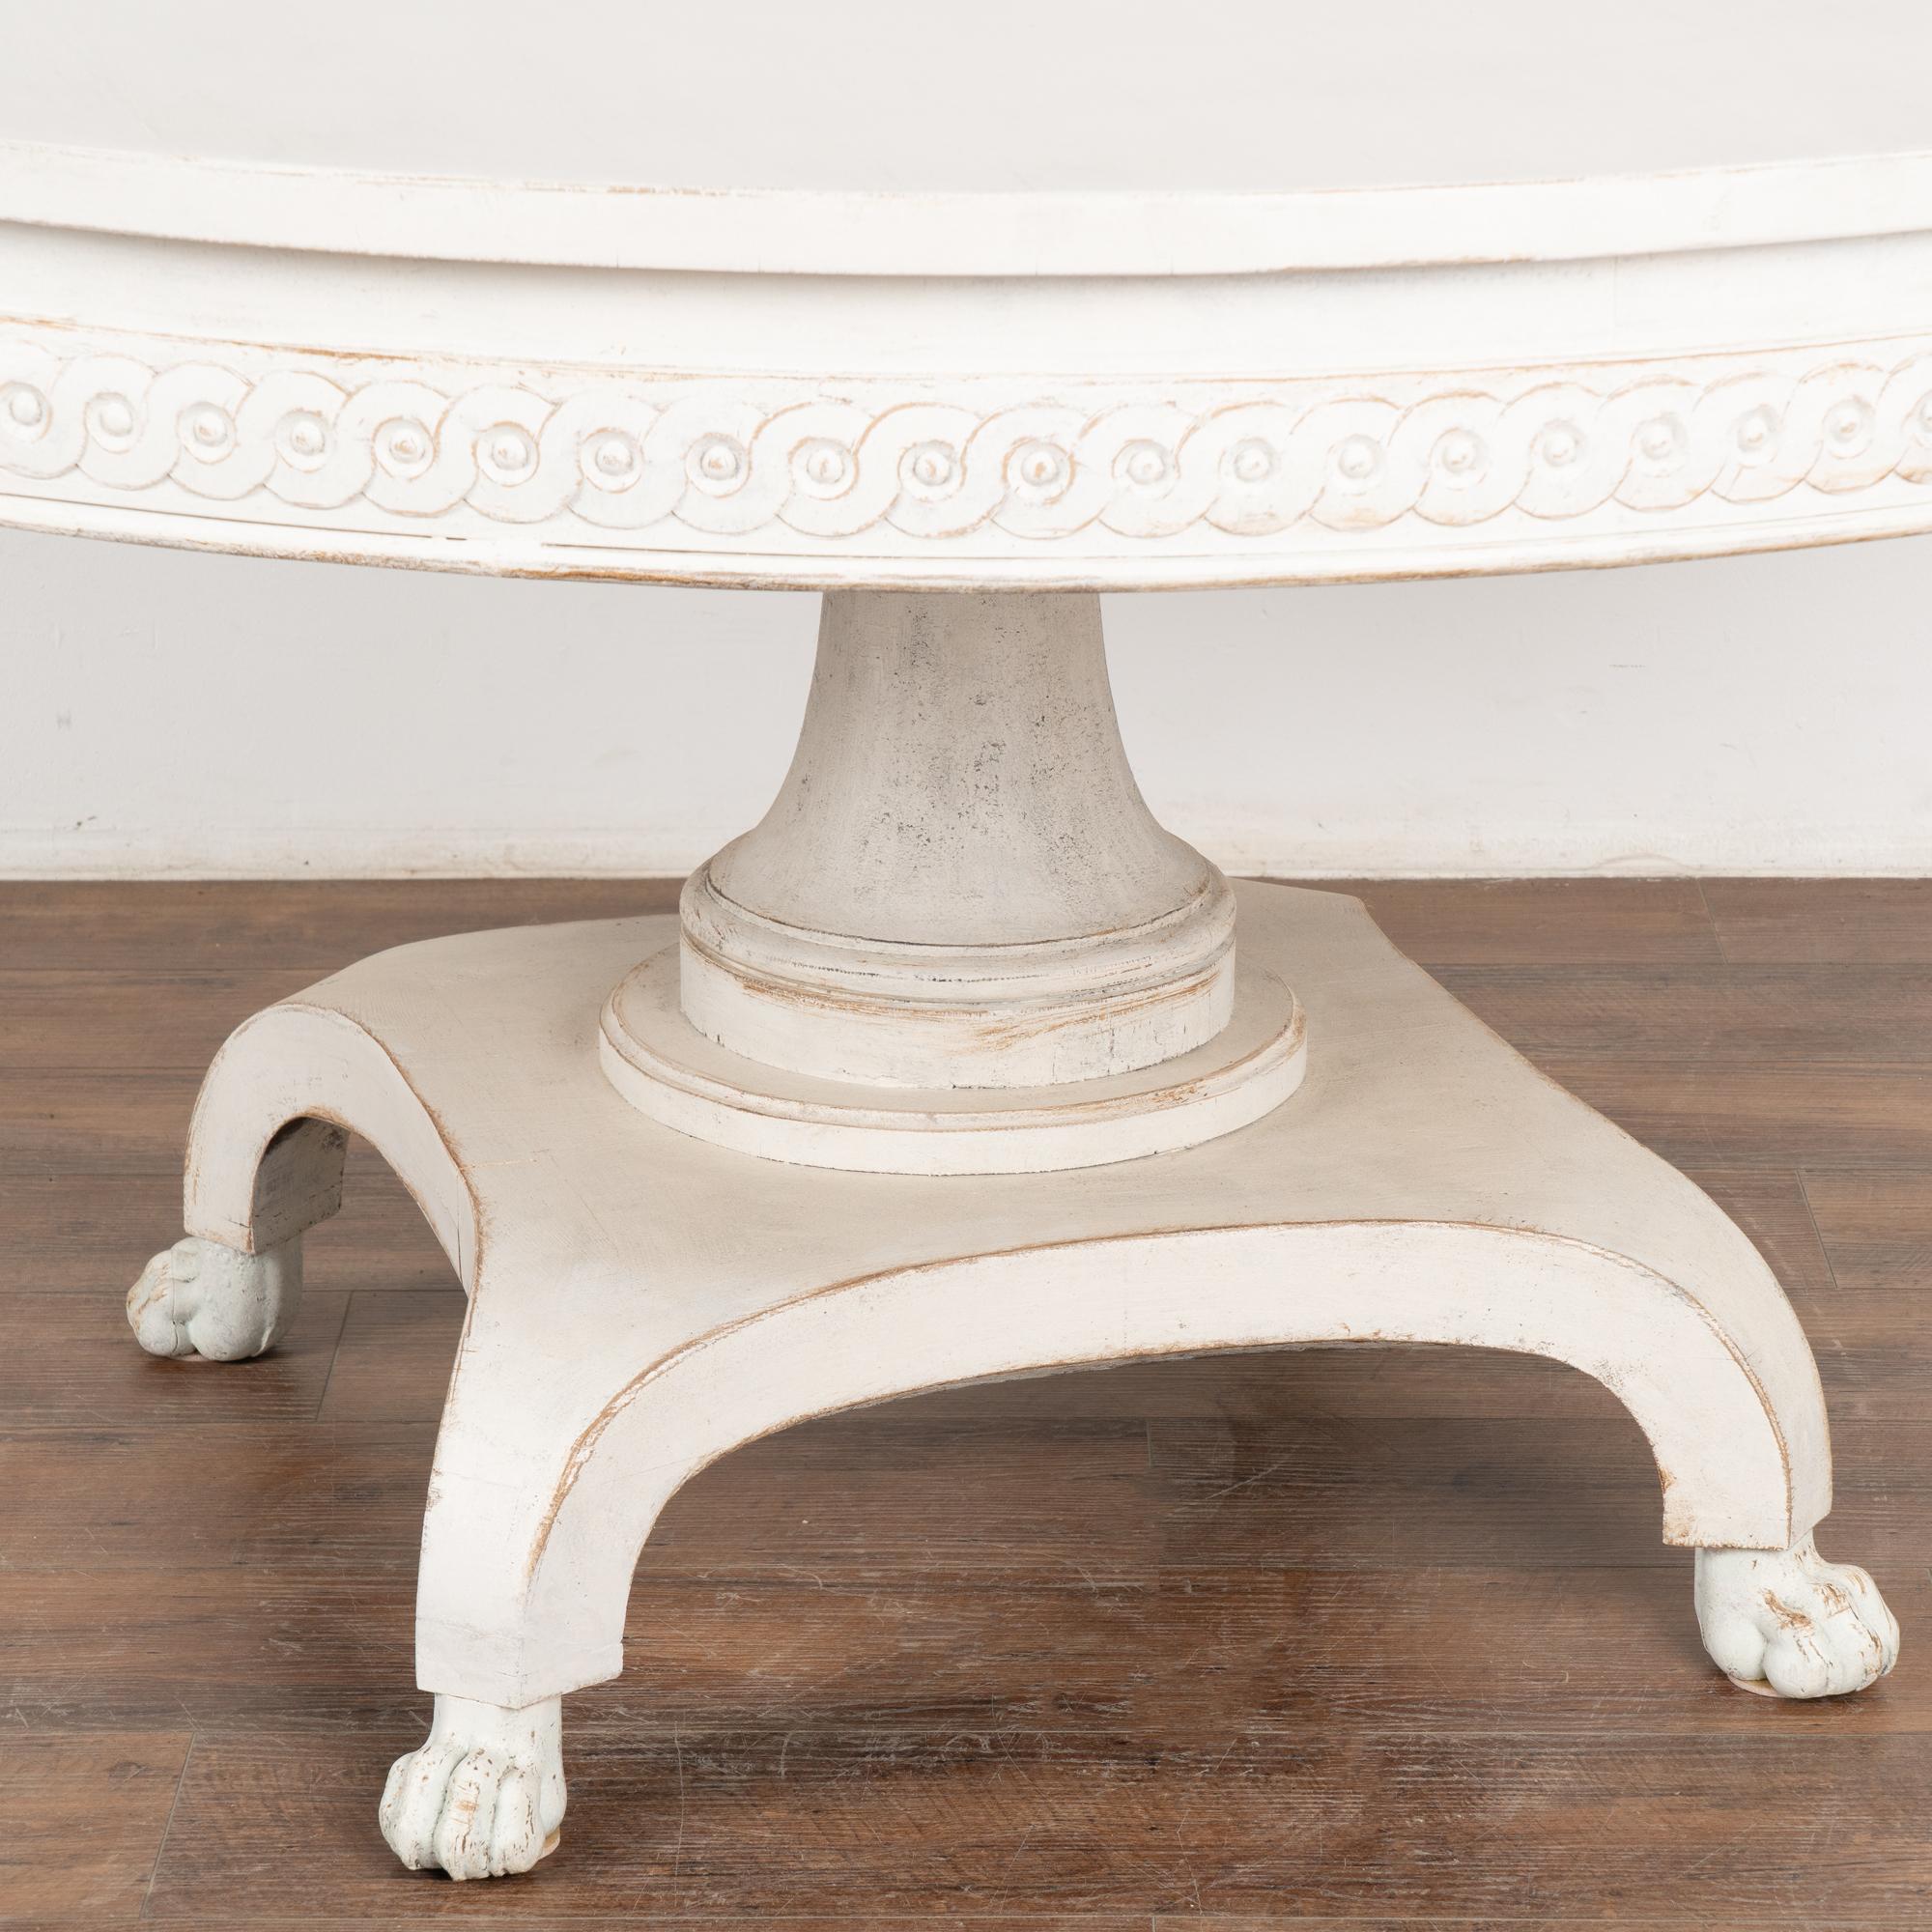 20th Century Large 5' Round White Painted Pedestal Table, Sweden circa 1920 For Sale